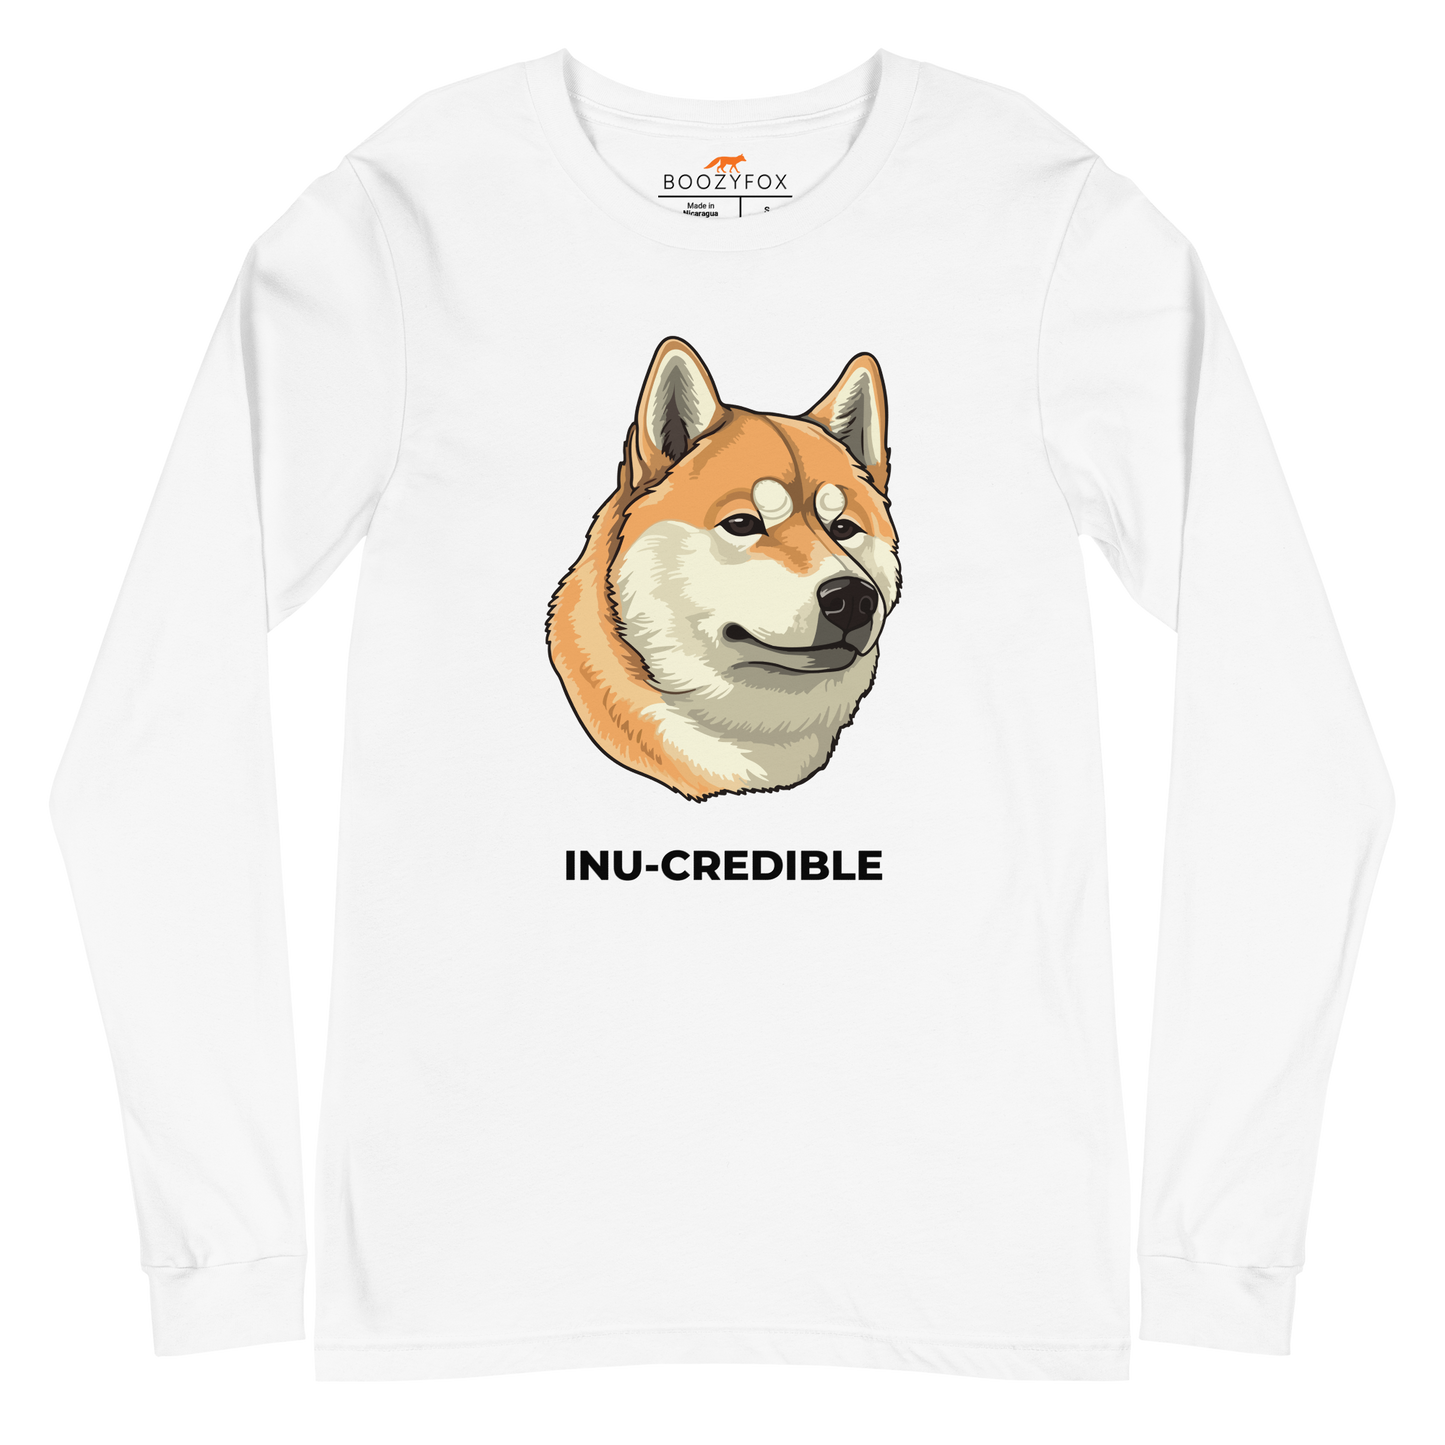 White Shiba Inu Long Sleeve Tee featuring the Inu-Credible graphic on the chest - Funny Shiba Inu Long Sleeve Graphic Tees - Boozy Fox